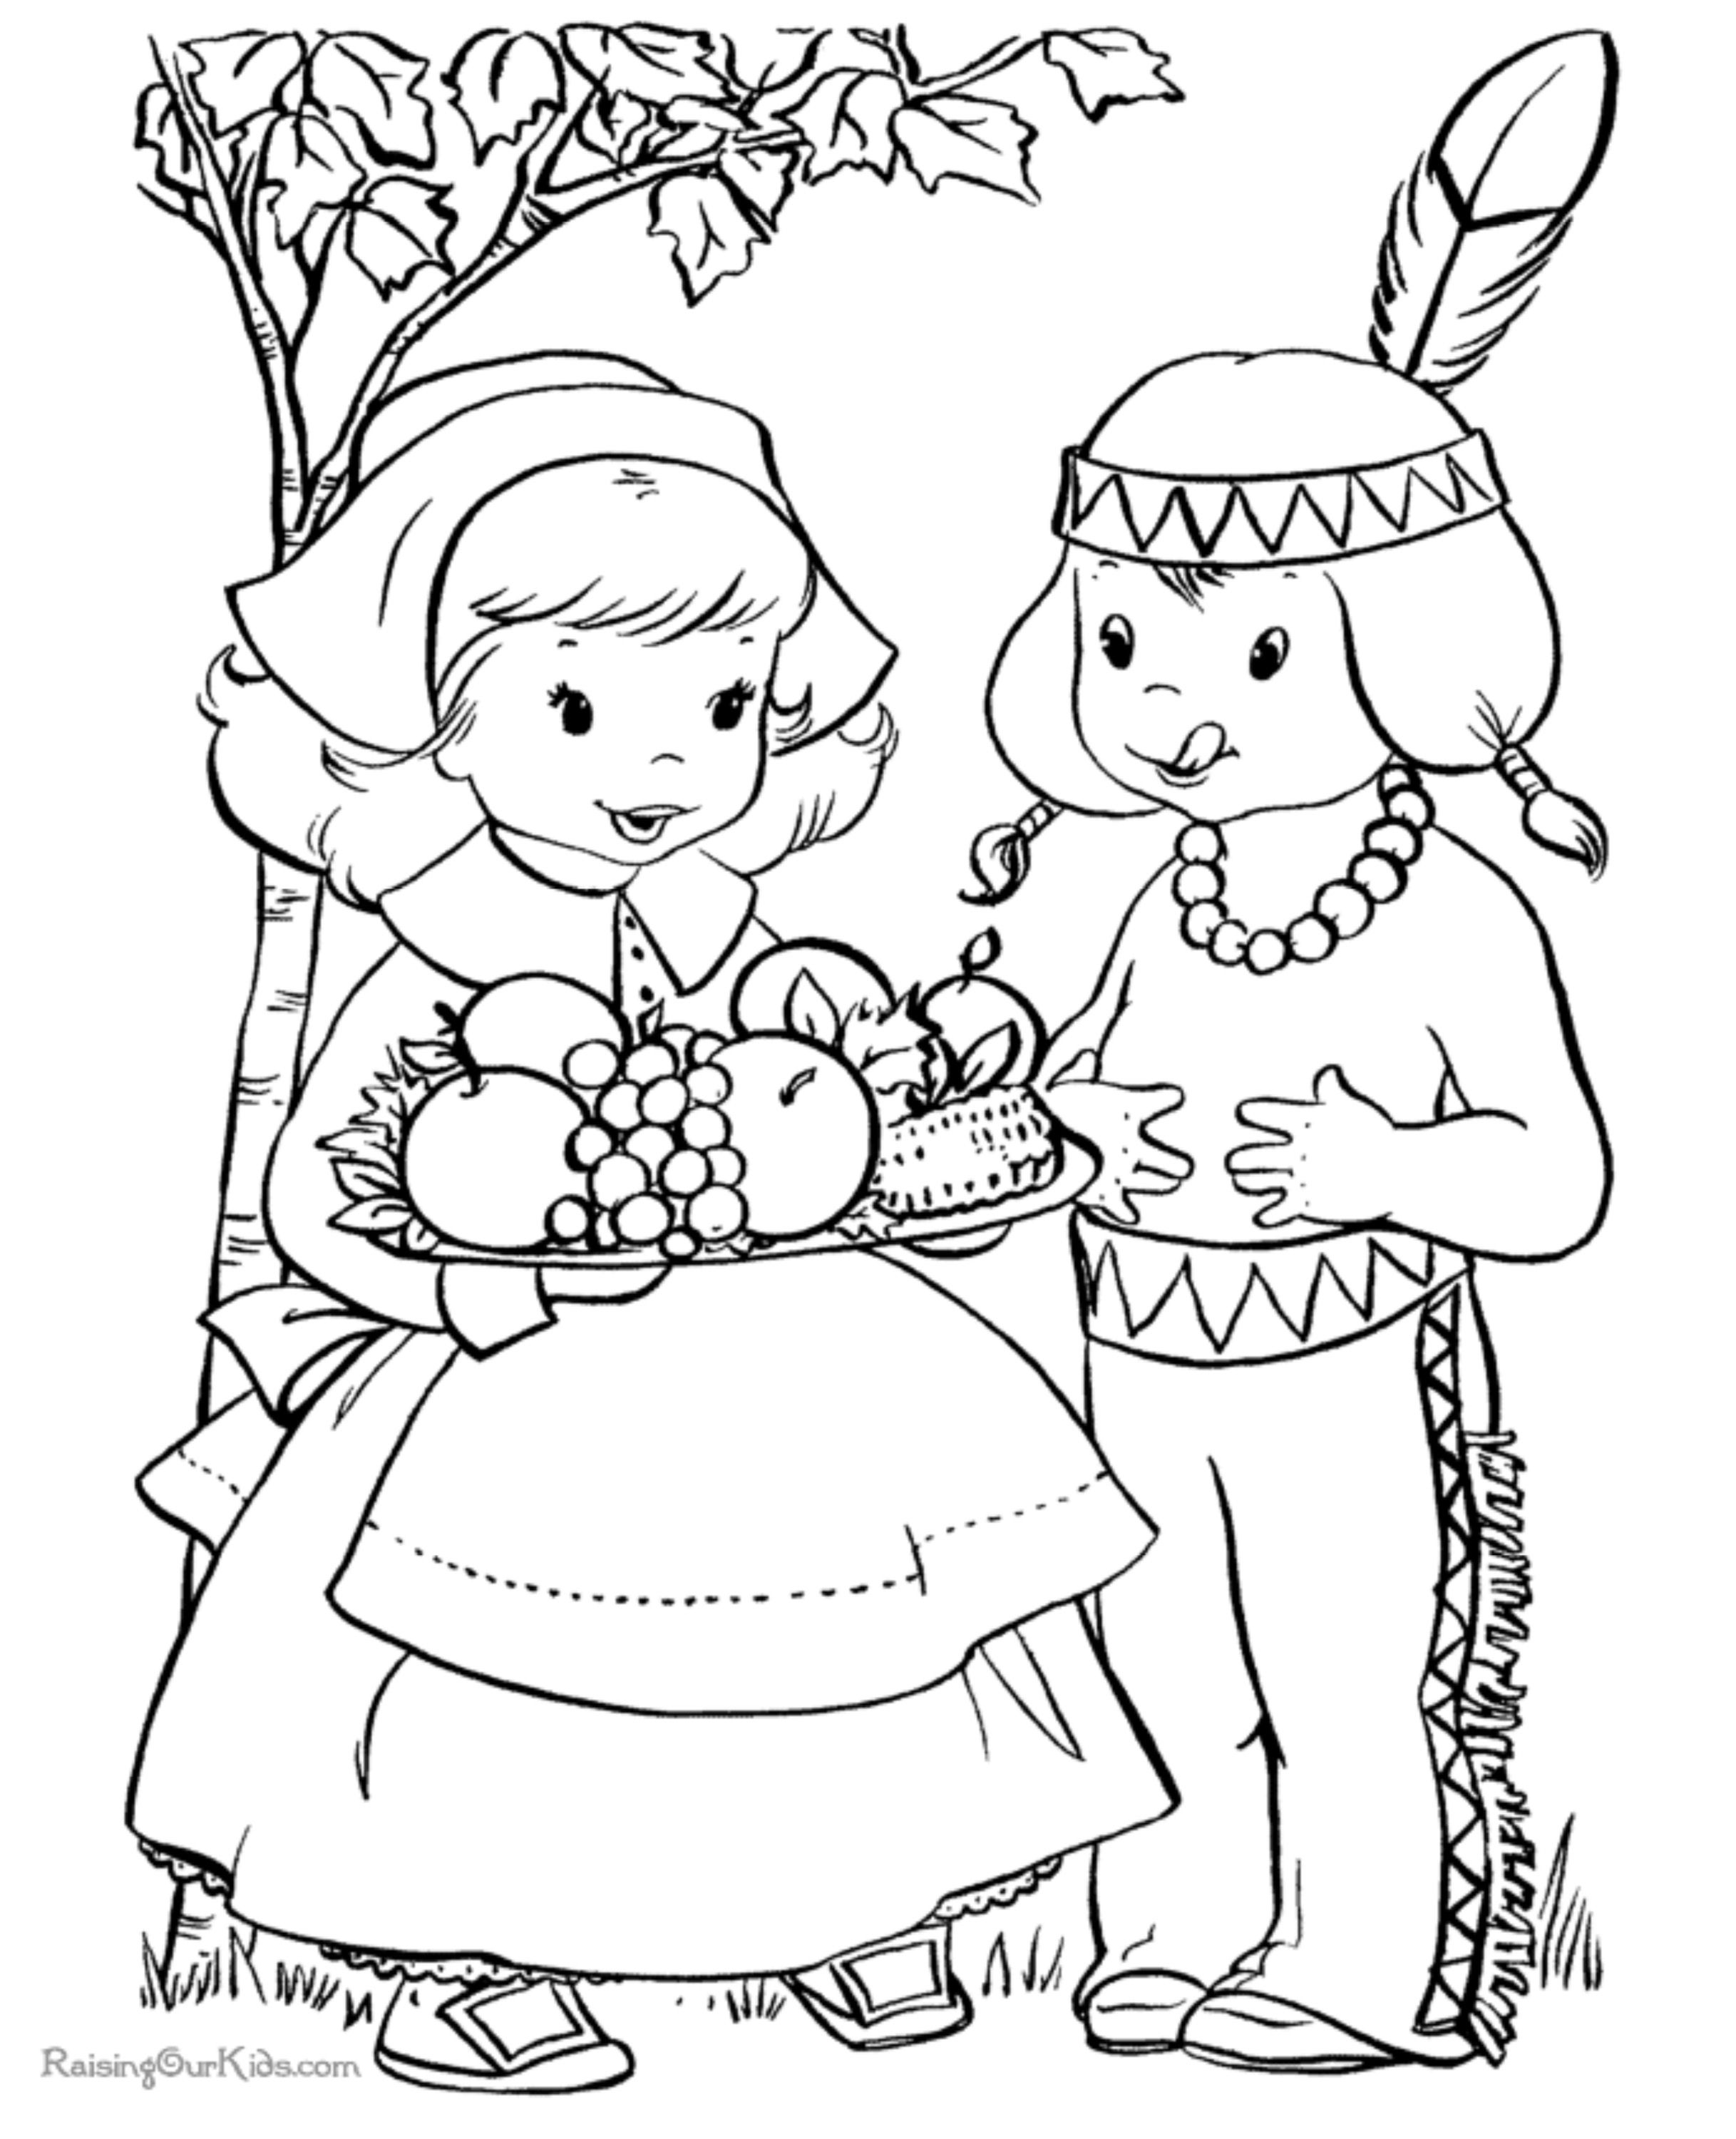 Thanksgiving Coloring Pages | Northern News